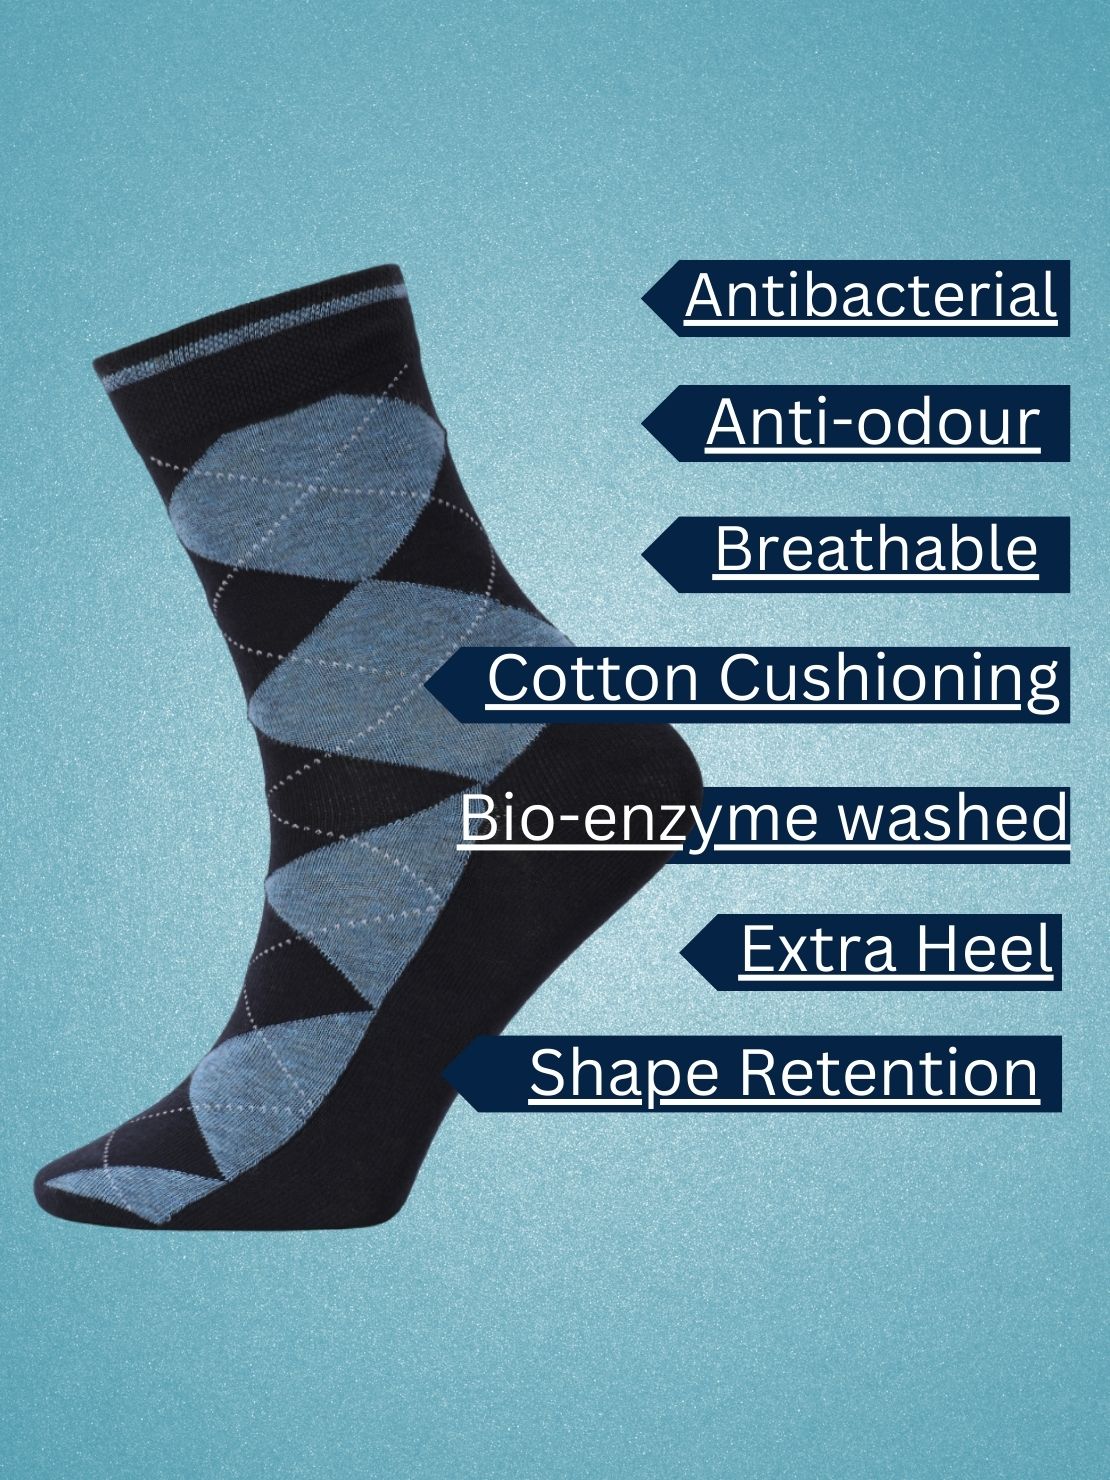 Hirolas Cotton Anti-Odour Breathable Antibacterial business Formal/office wear Crew full length Socks for Men (Free Size) | Made with 100% Combed Cotton and Spandex (Navy/ Black/ Light Grey) - Pack of 3 socks